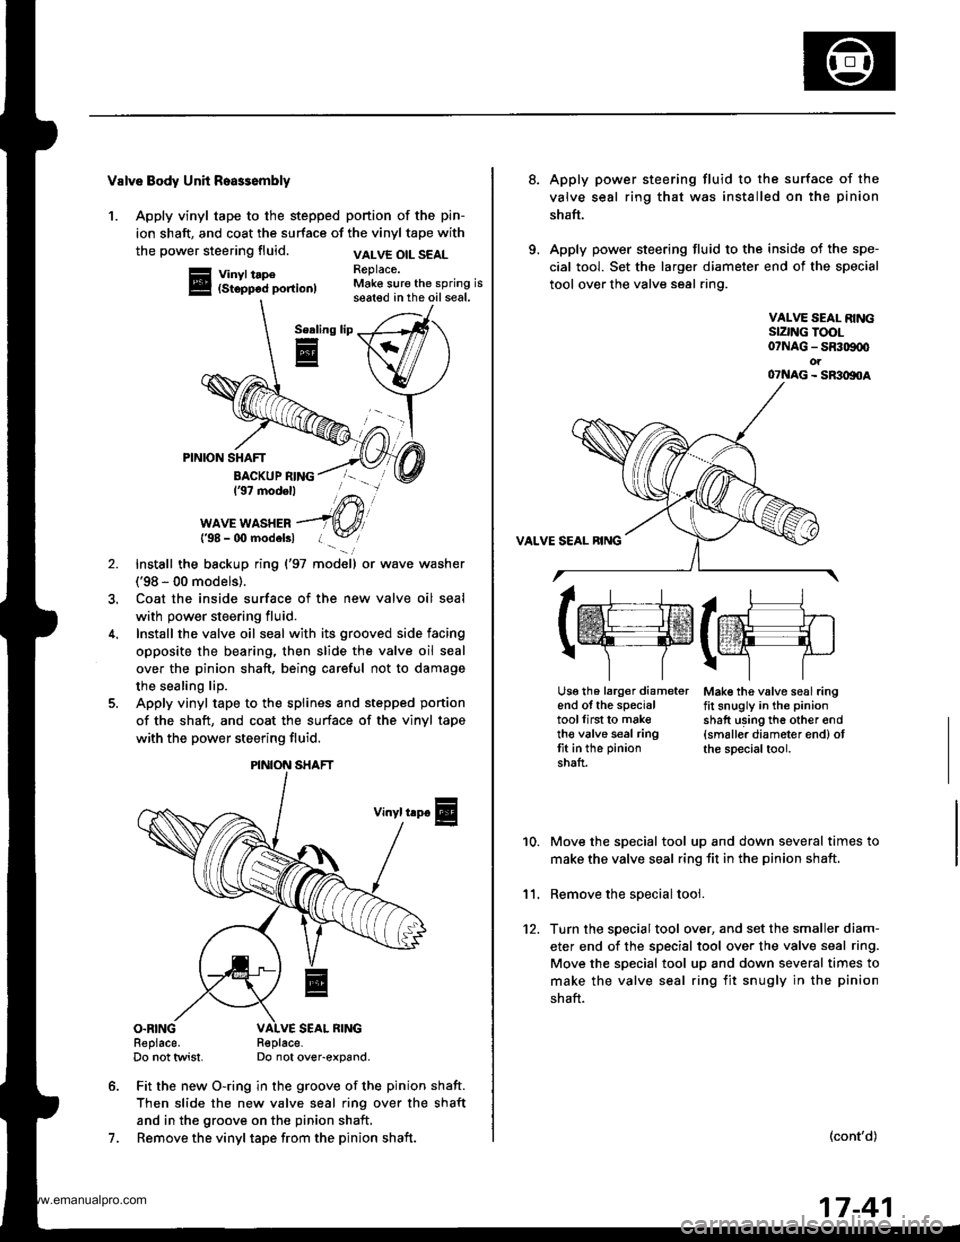 HONDA CR-V 1998 RD1-RD3 / 1.G User Guide 
Valve Body Unh Roa$embly
1. Apply vinyl tape to the stepped portion of the pin-
ion shaft, and coat the surface of the vinyl tape with
the power steering fluid.
Vinyl tape(Stopp6d portion)
VALVE OIL 